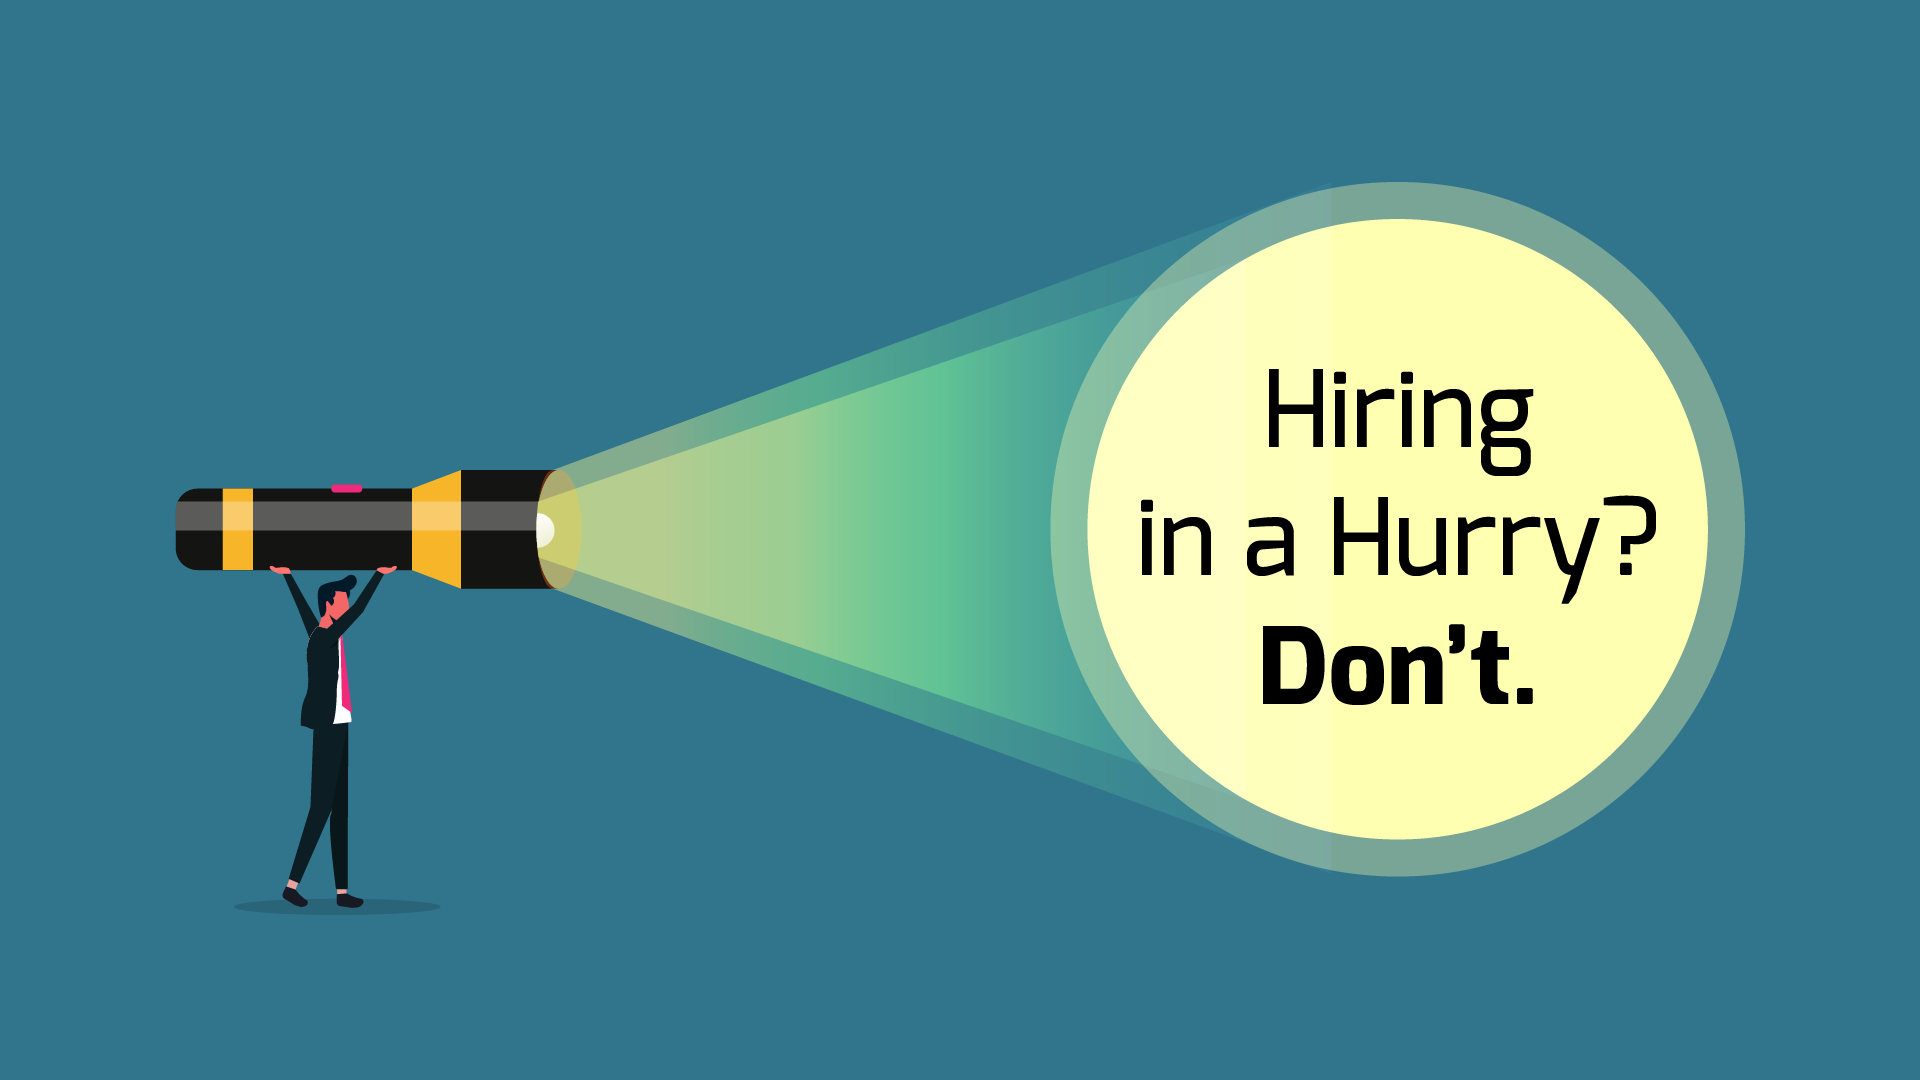 Hiring in a Hurry? Don’t.